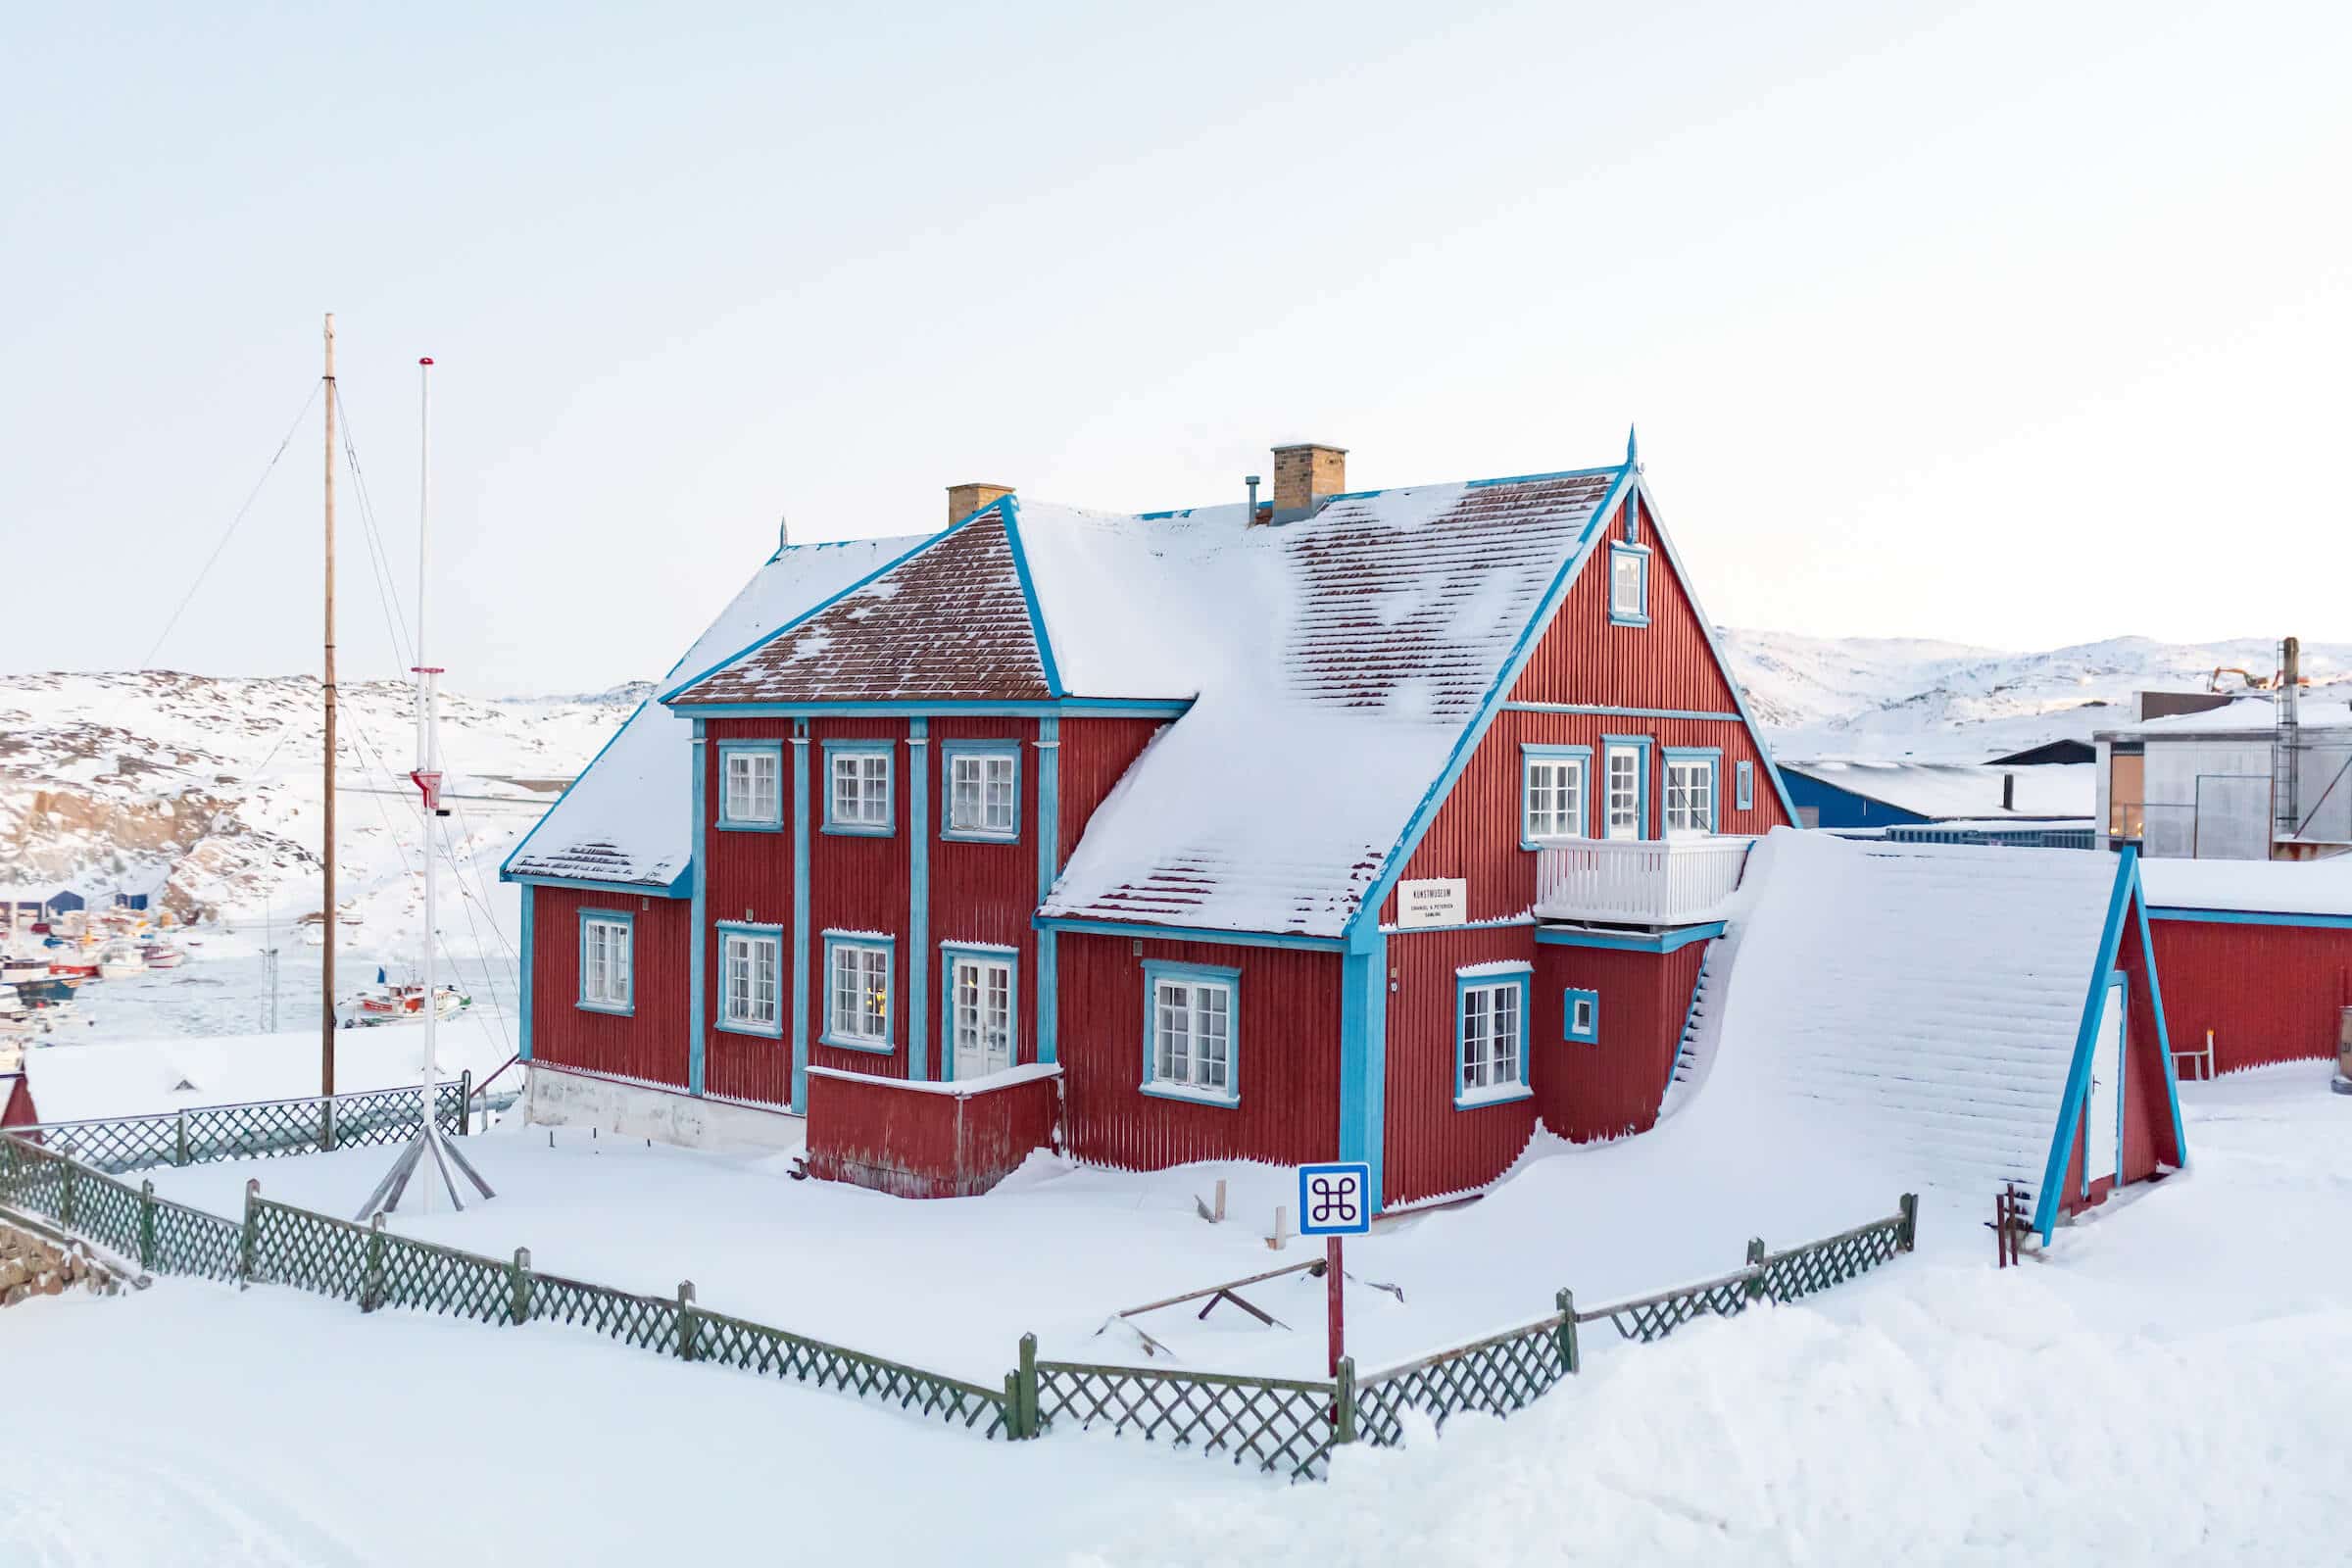 The Art Museum In The Day. Photo by Filip Gielda, Visit Greenland